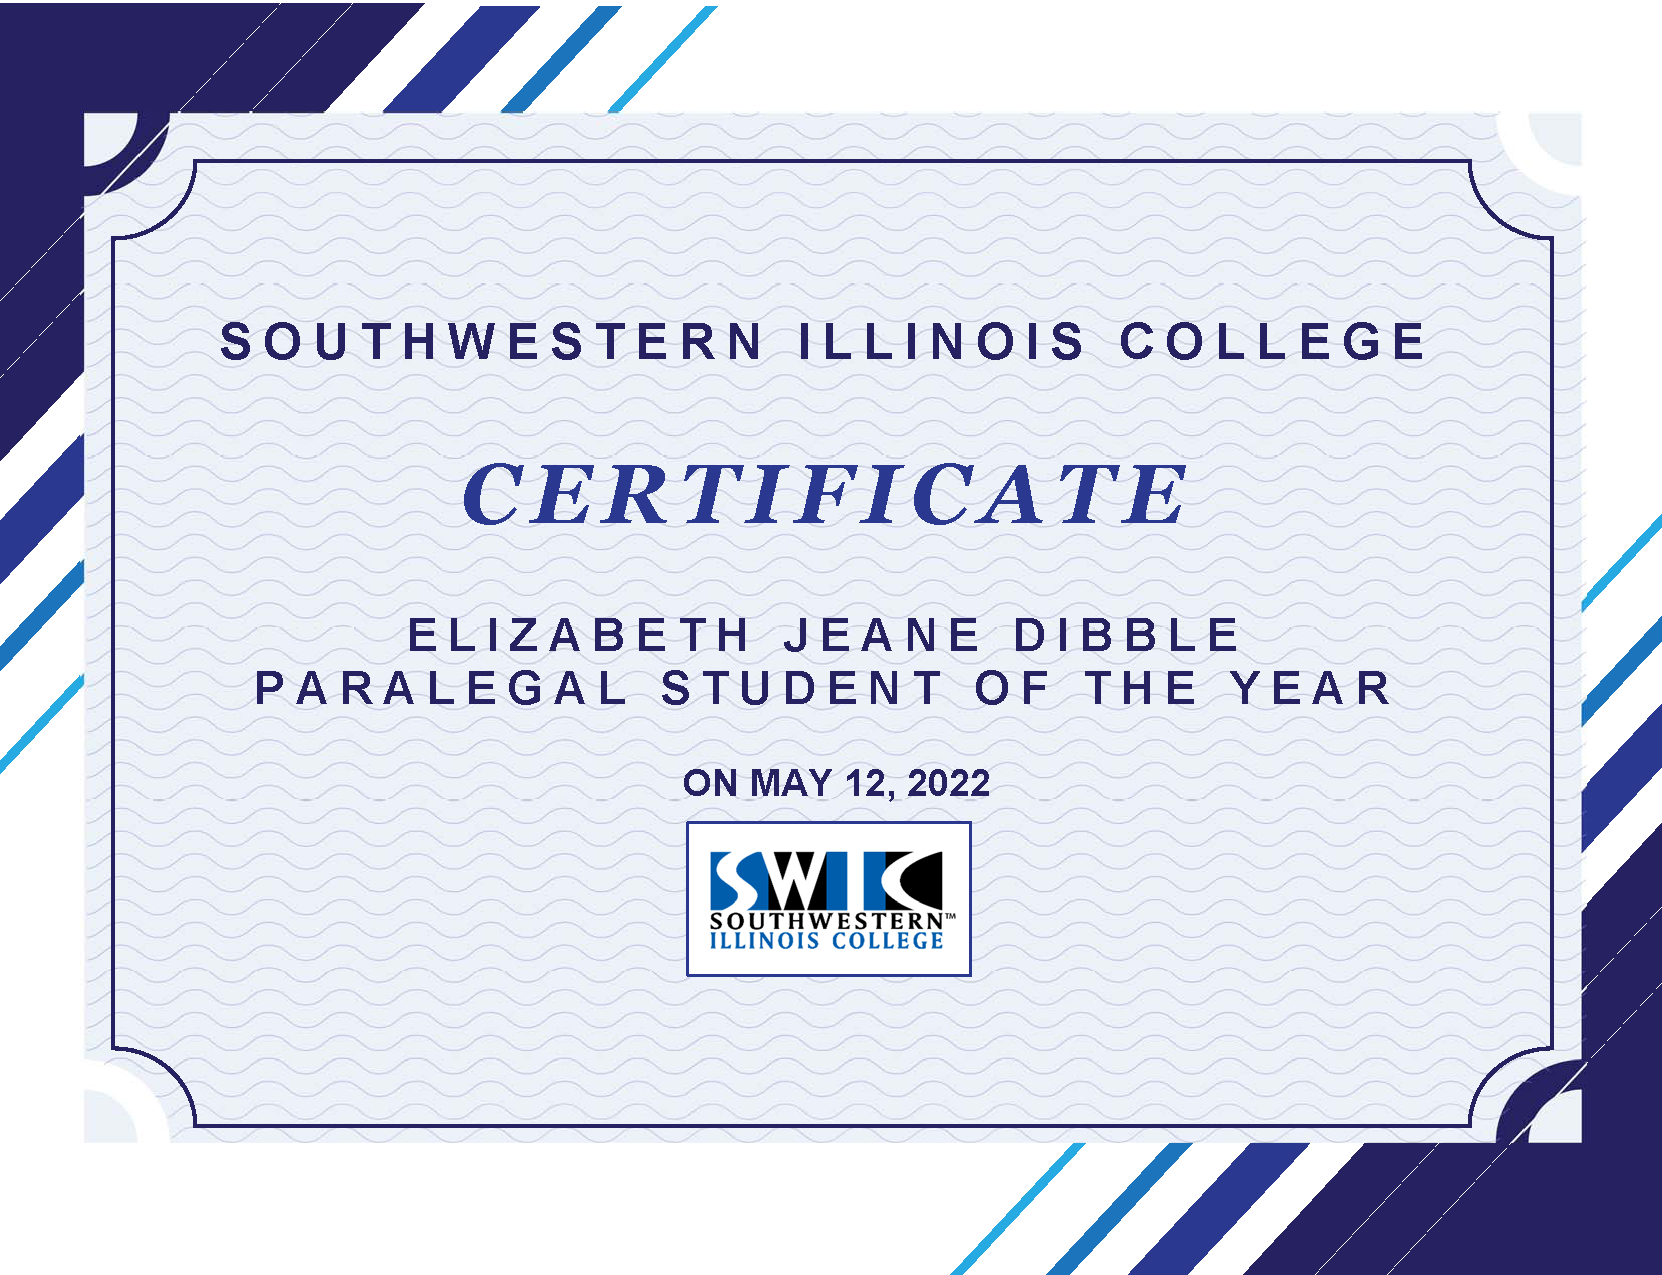 Southwestern Illinois College Certificate Elizabeth Jeane Dibble Paralegal Student of the Year